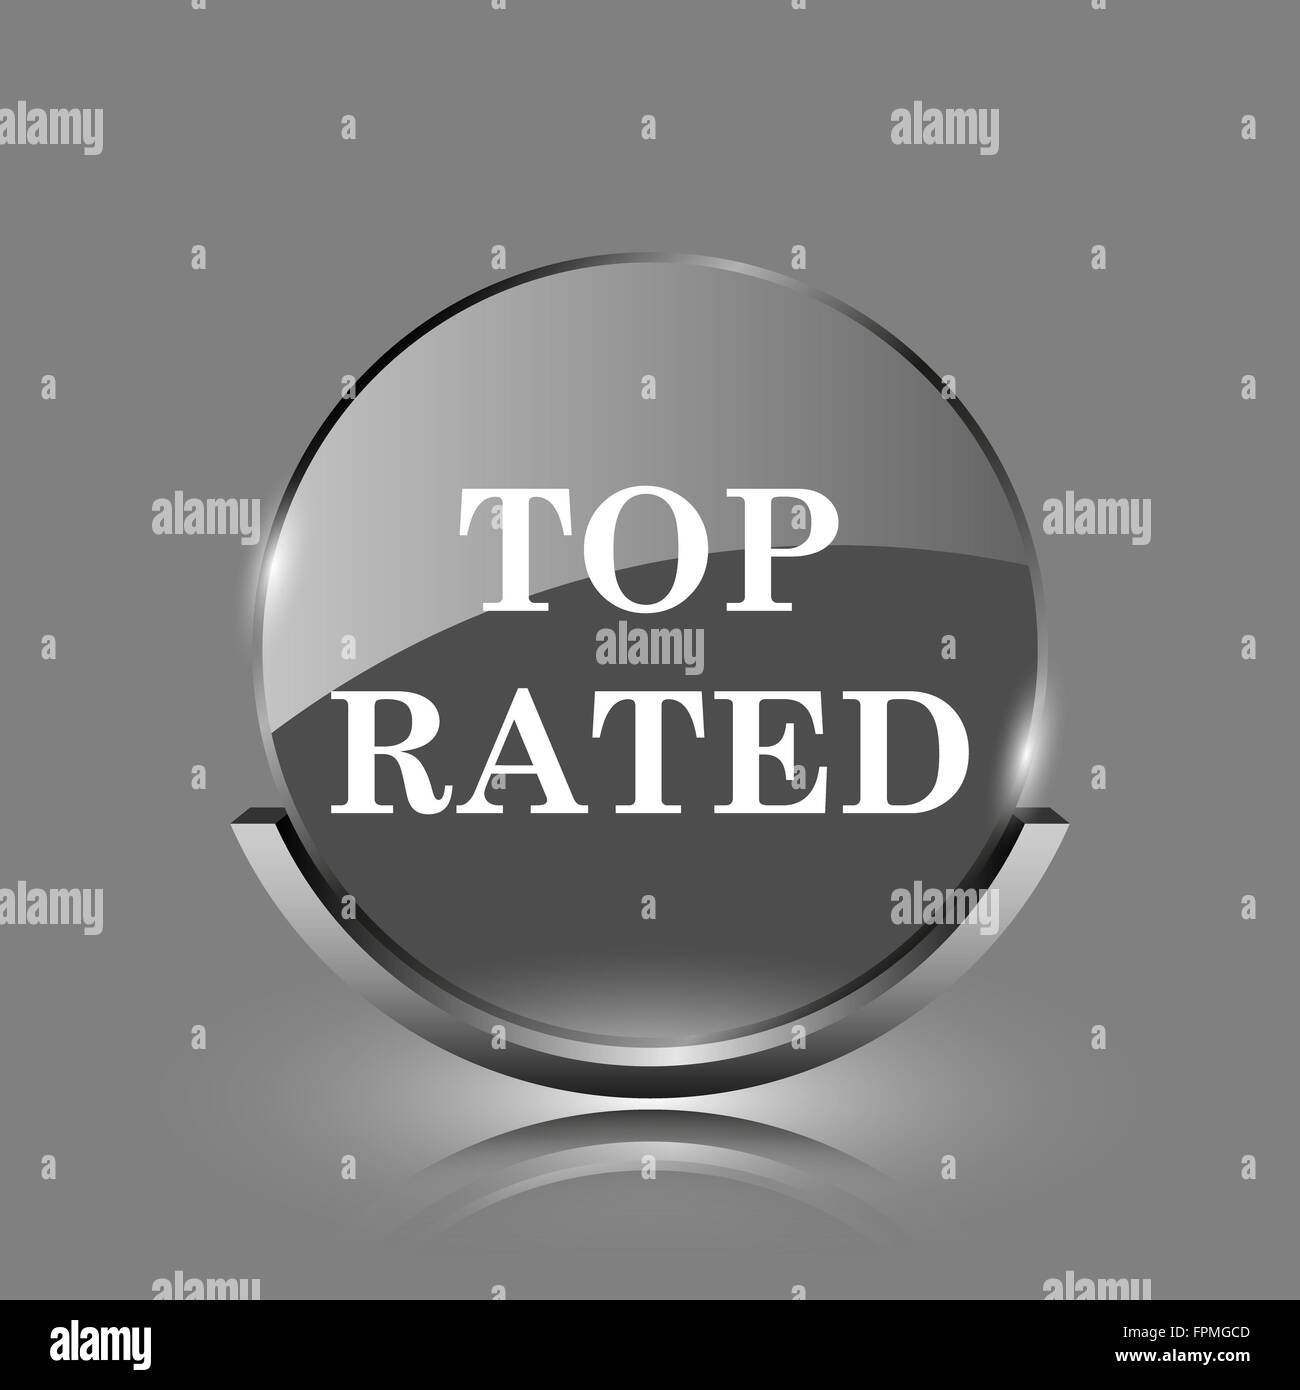 Top rated icon Black and White Stock Photos & Images - Alamy